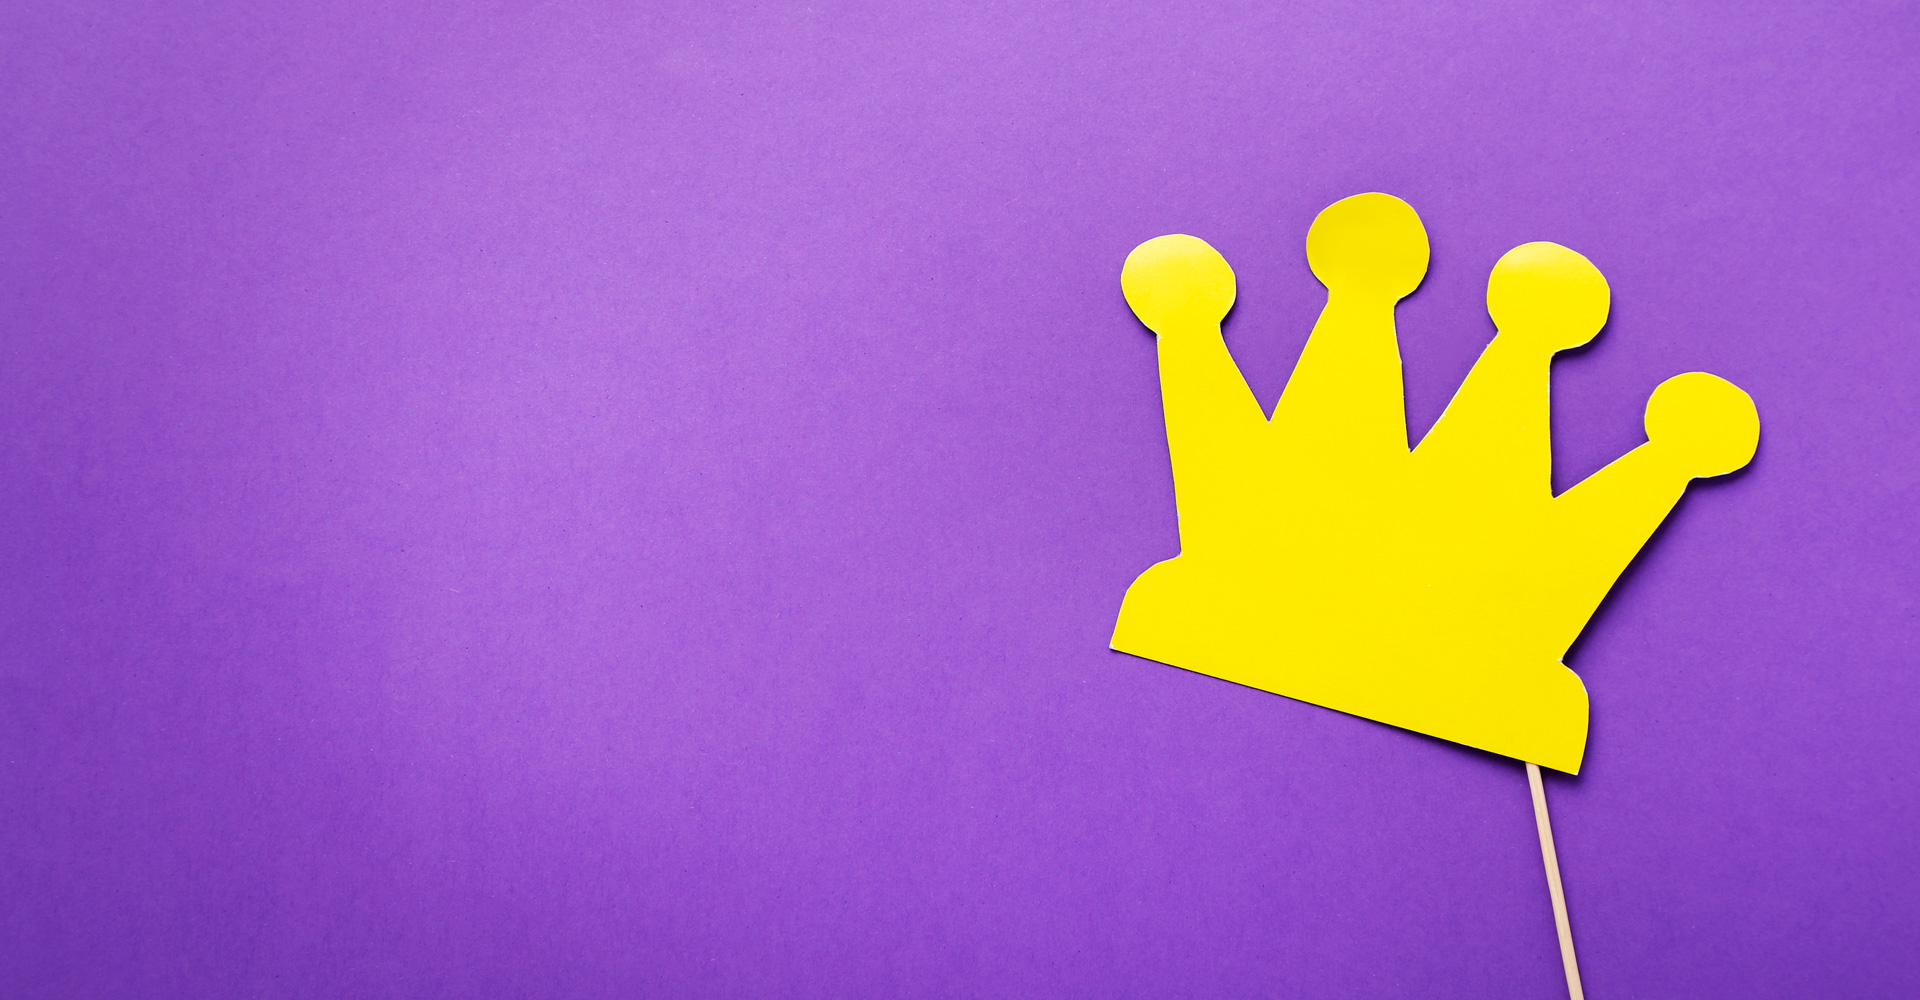 Yellow paper crown on purple background.